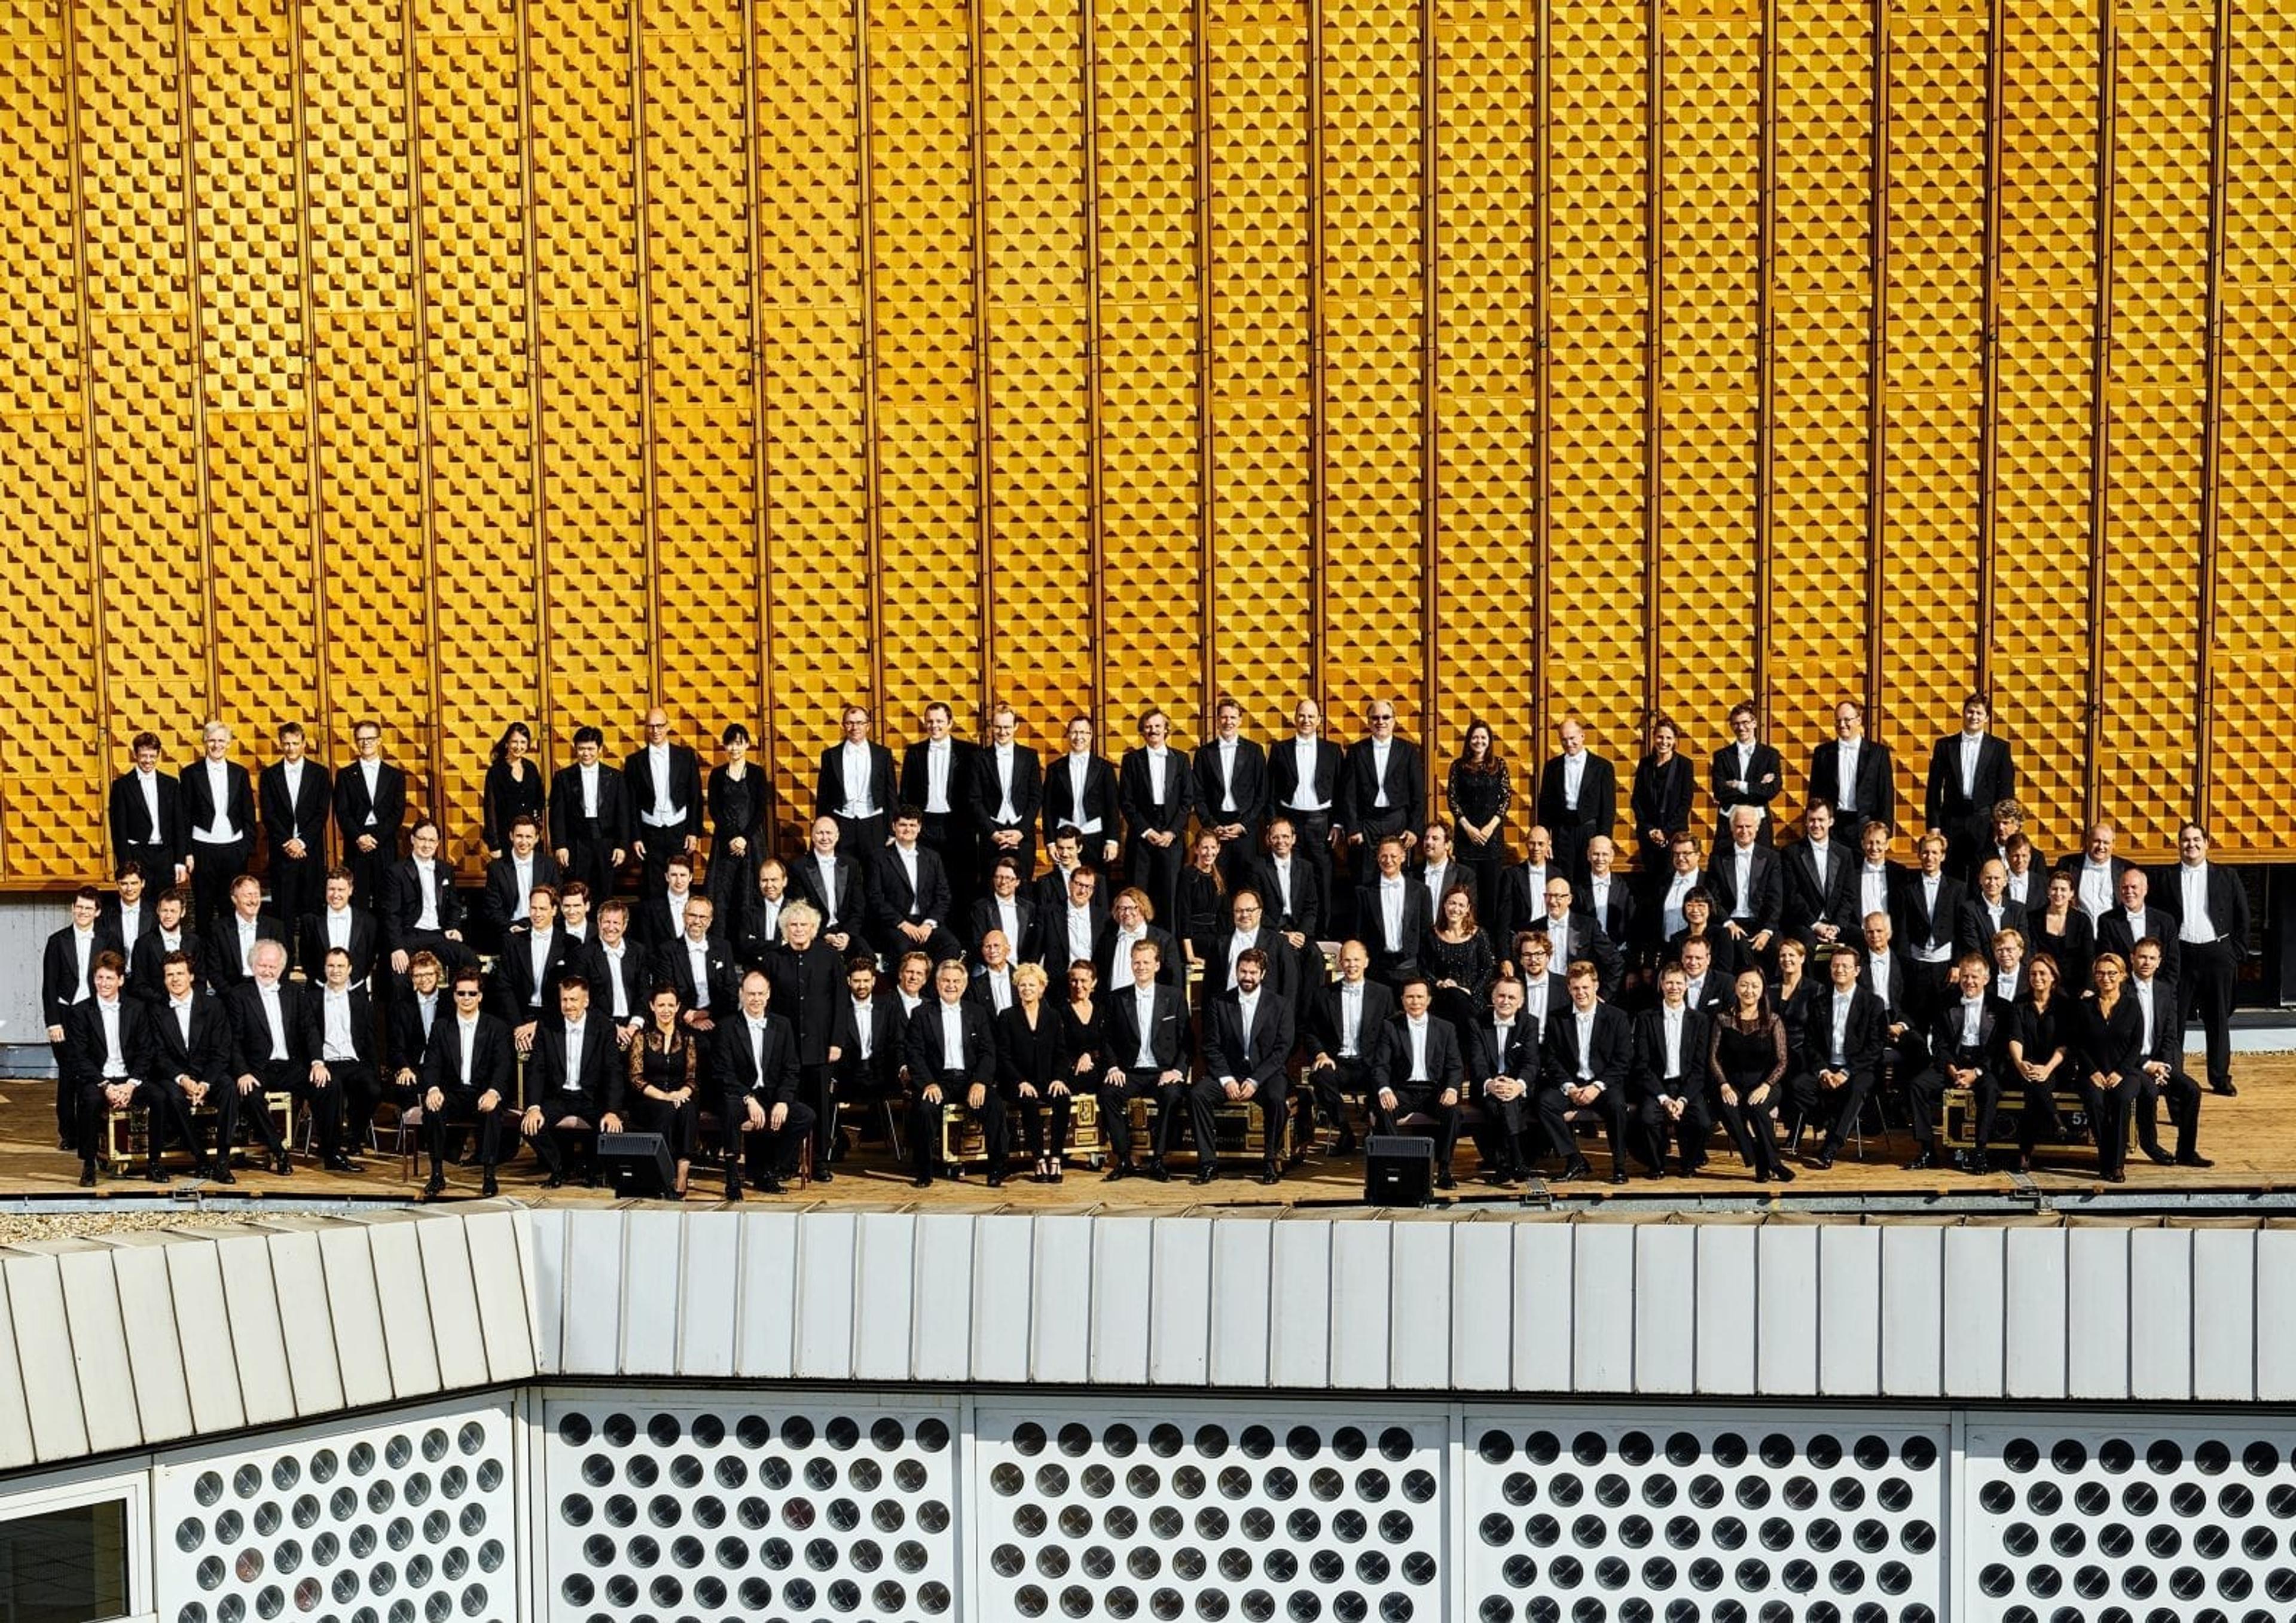 The Berliner Philharmoniker stood in formation in front of a striking yellow backdrop